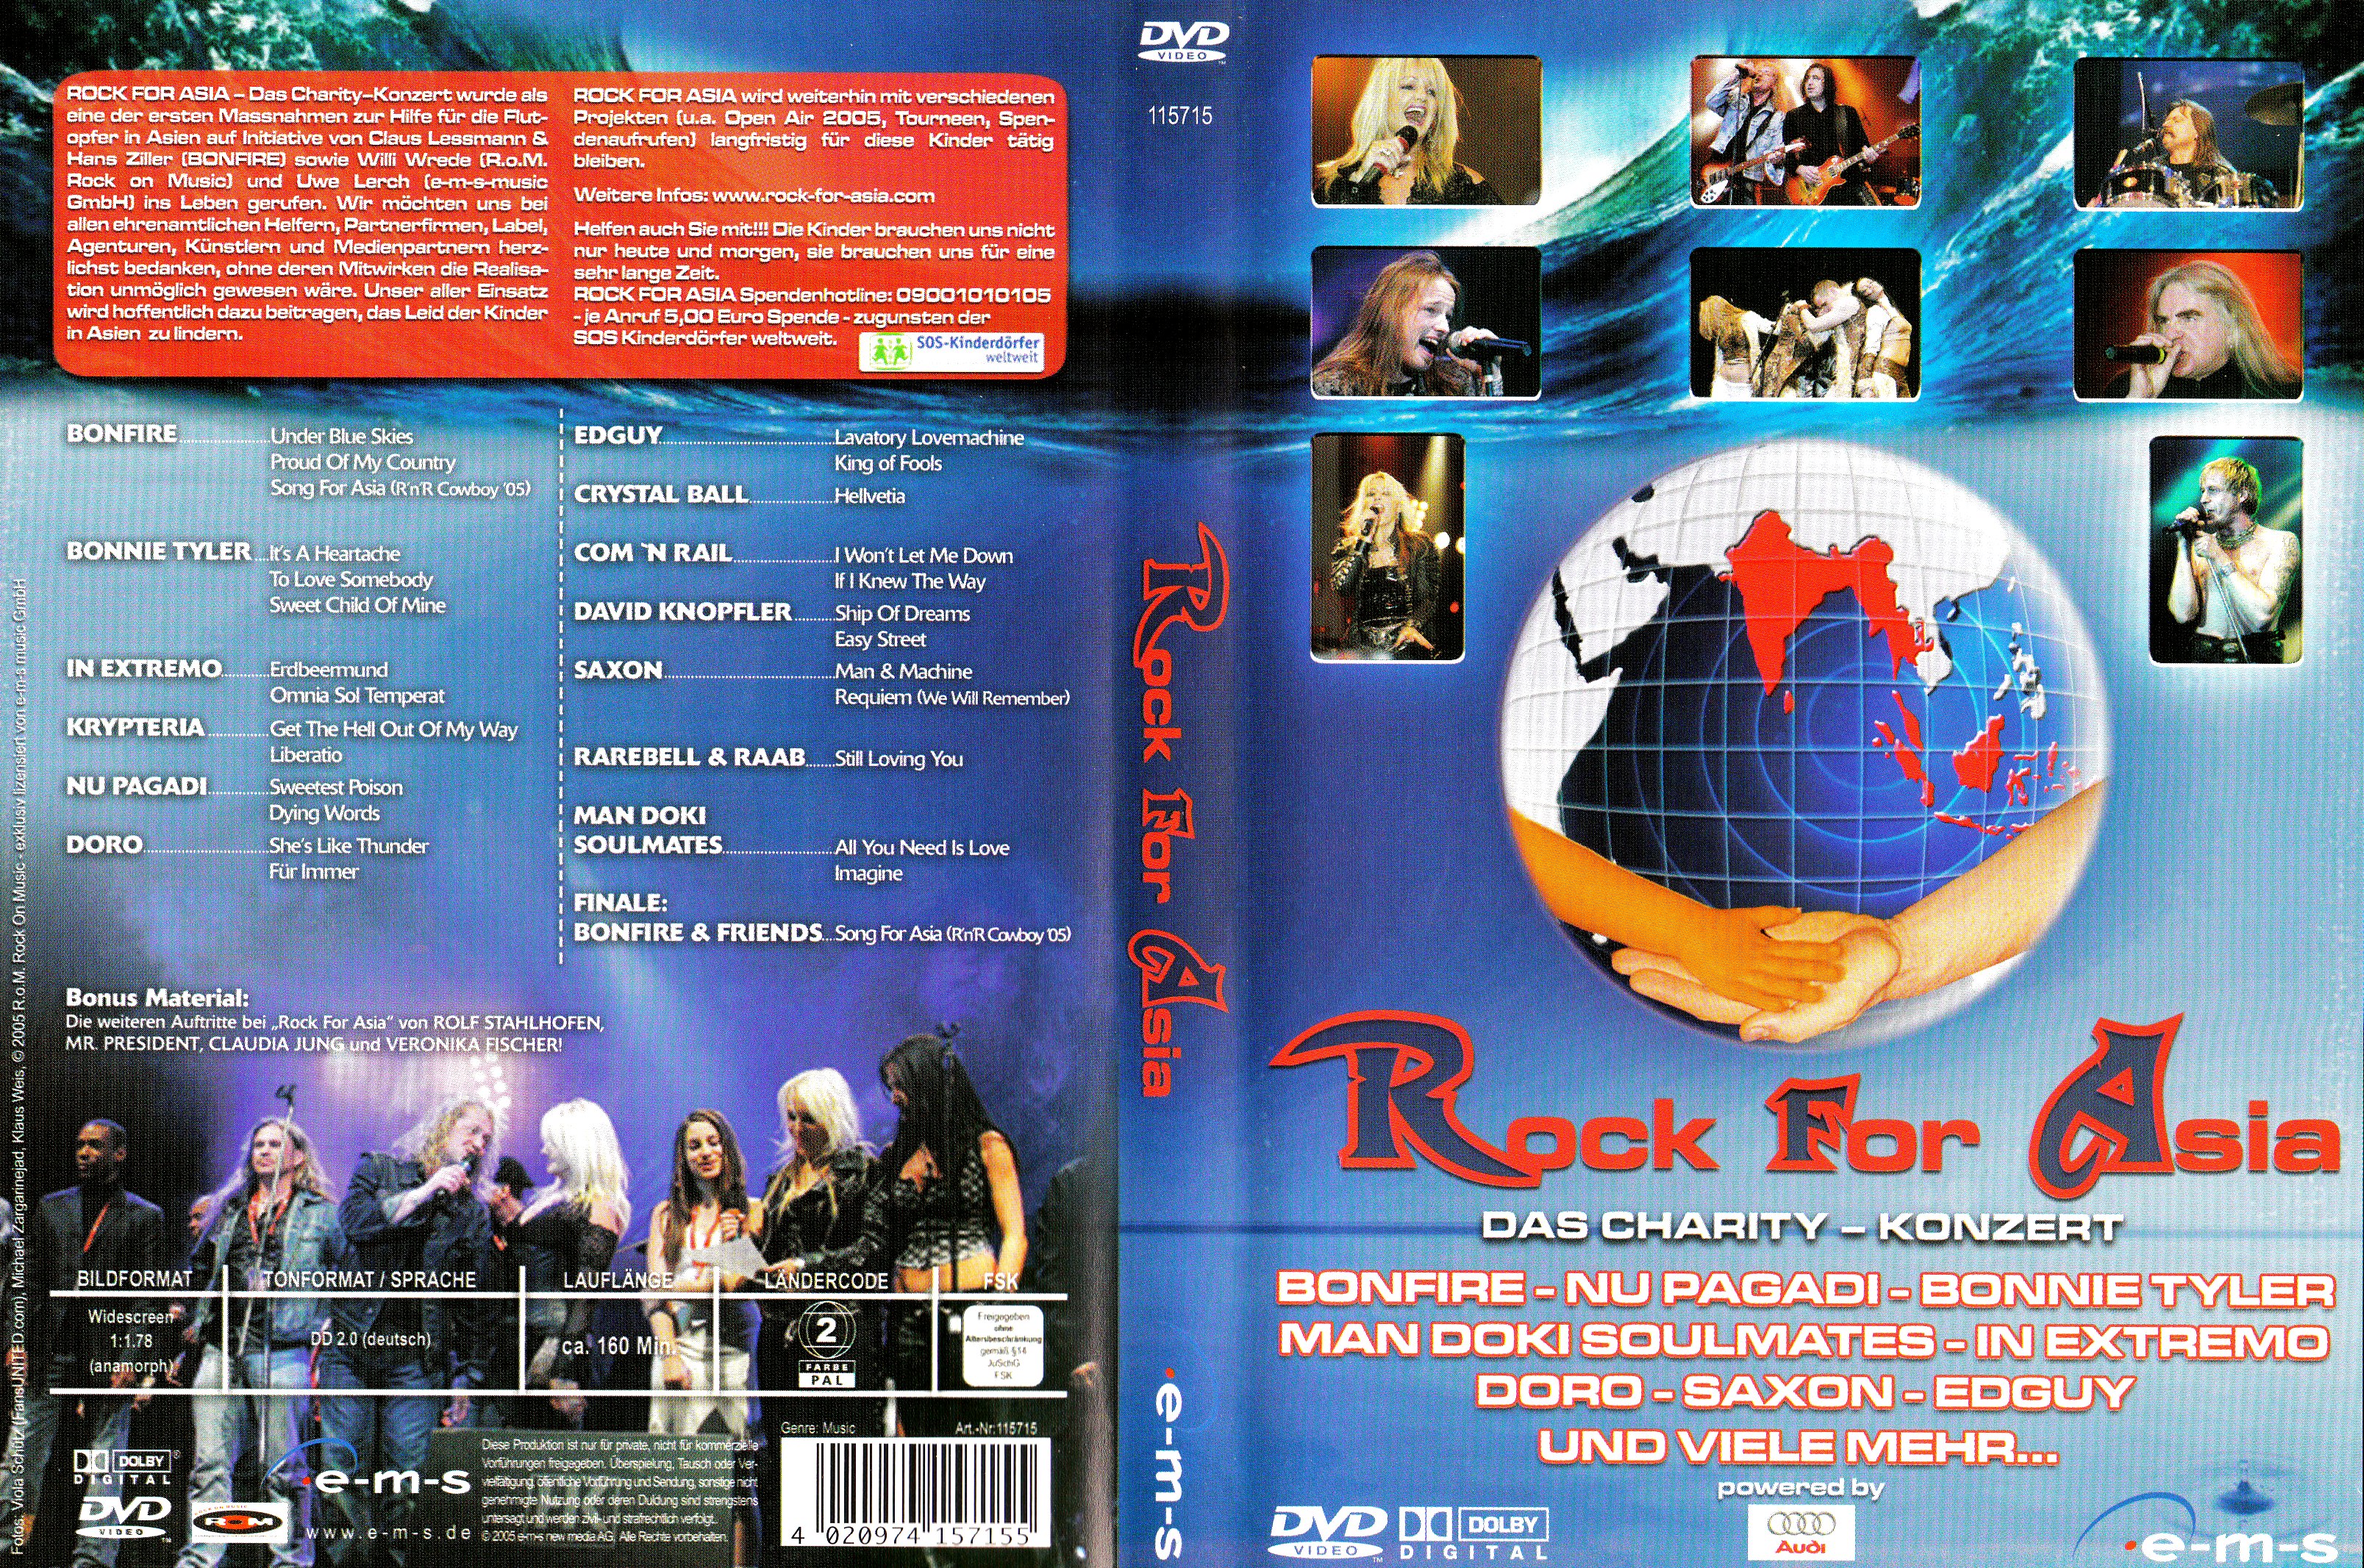 Jaquette DVD Rock for Asia